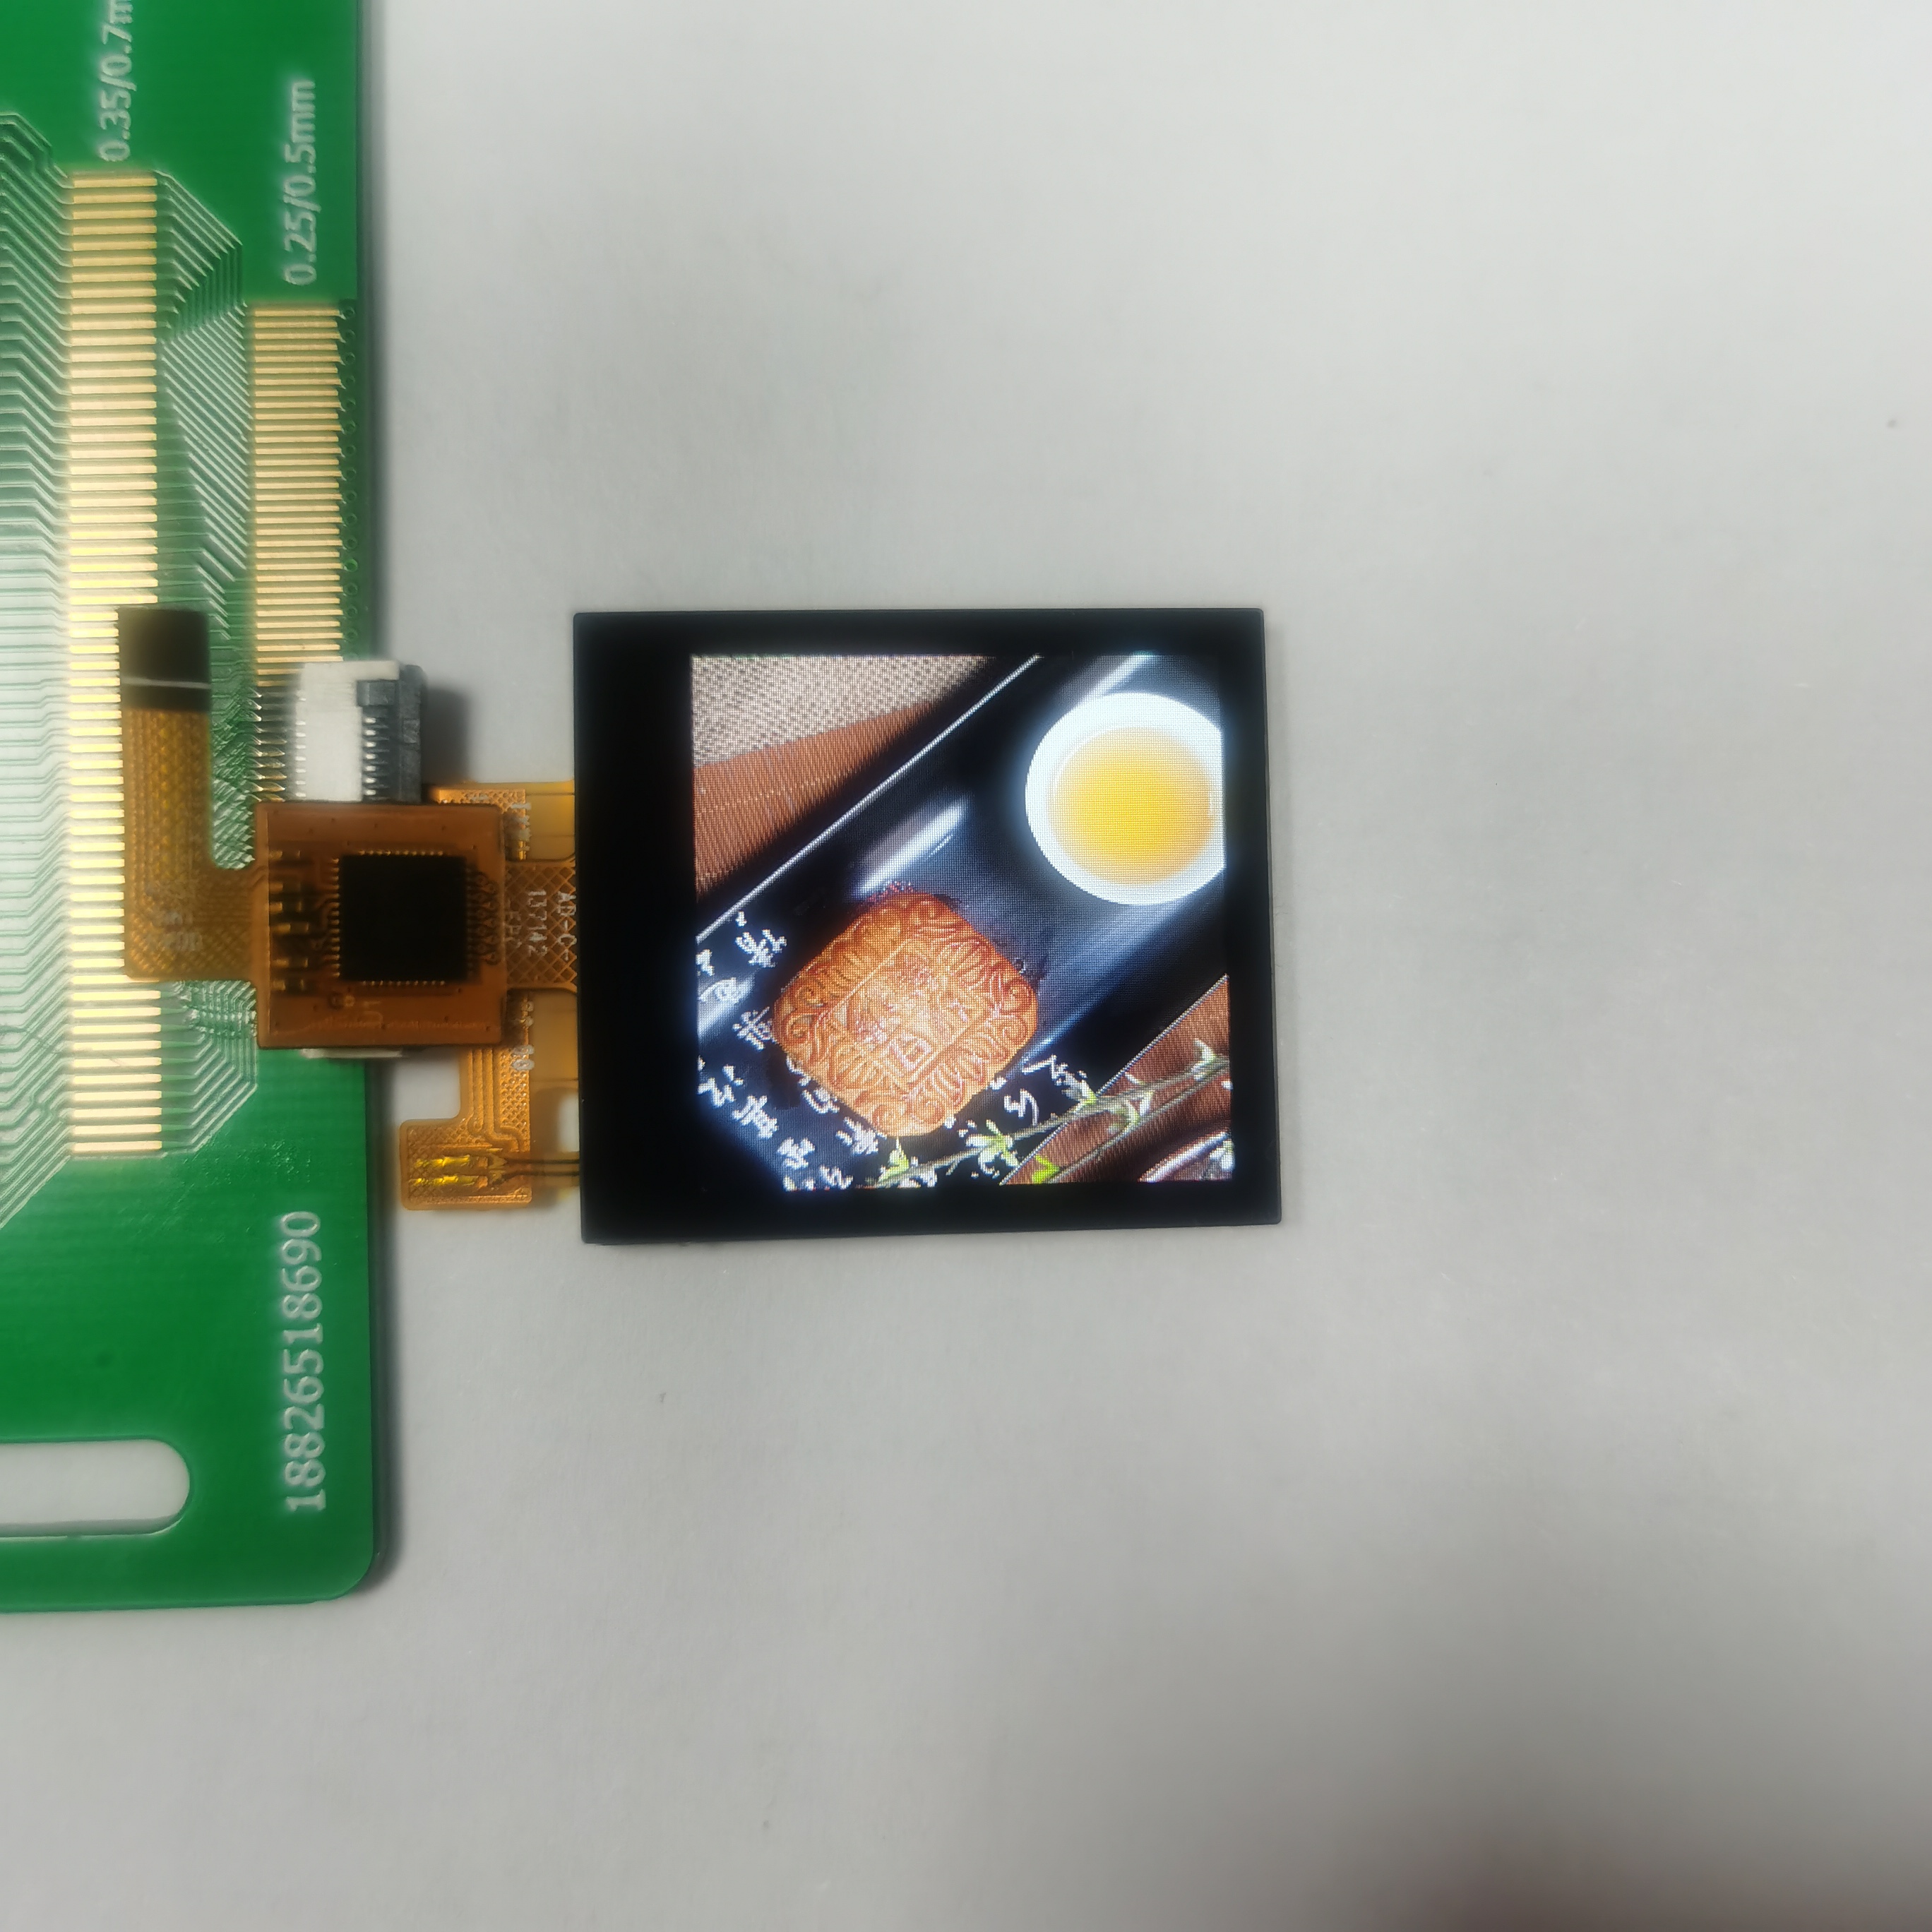 1.3 inch Square IPS interface lcd module for smart watch